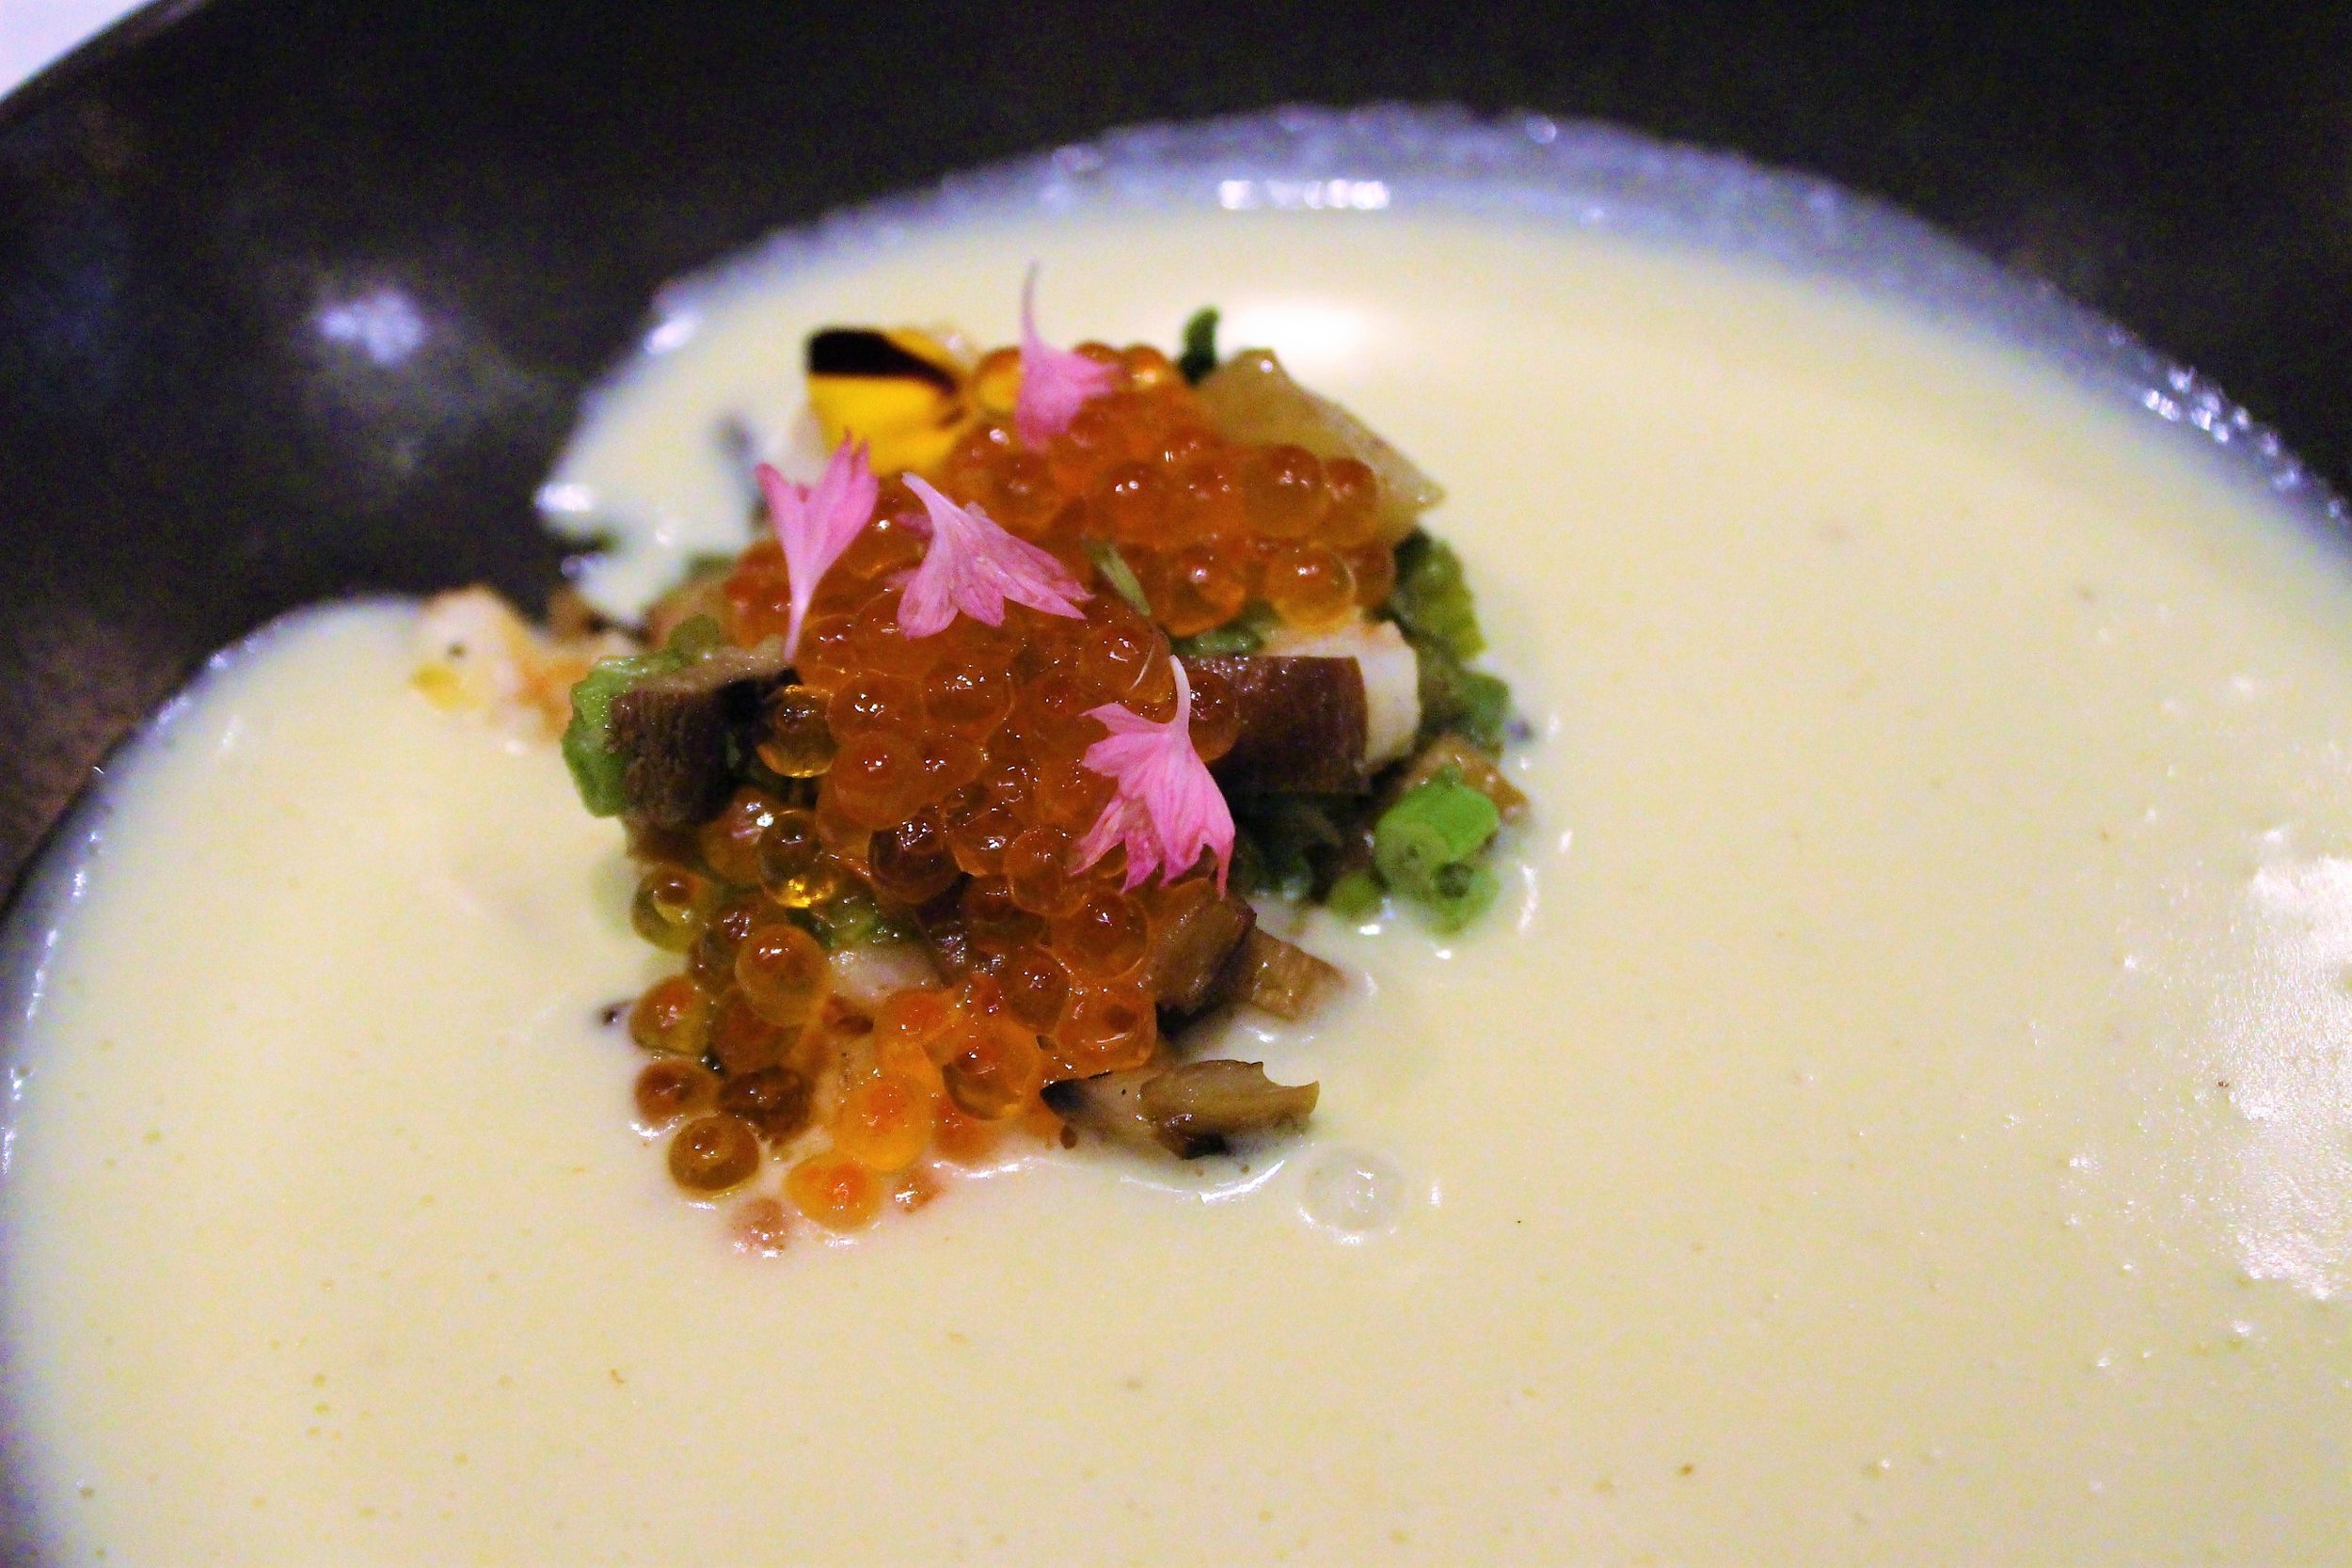 Yukon Potato-Rosemary Soup at Gabriel Kreuther in New York City